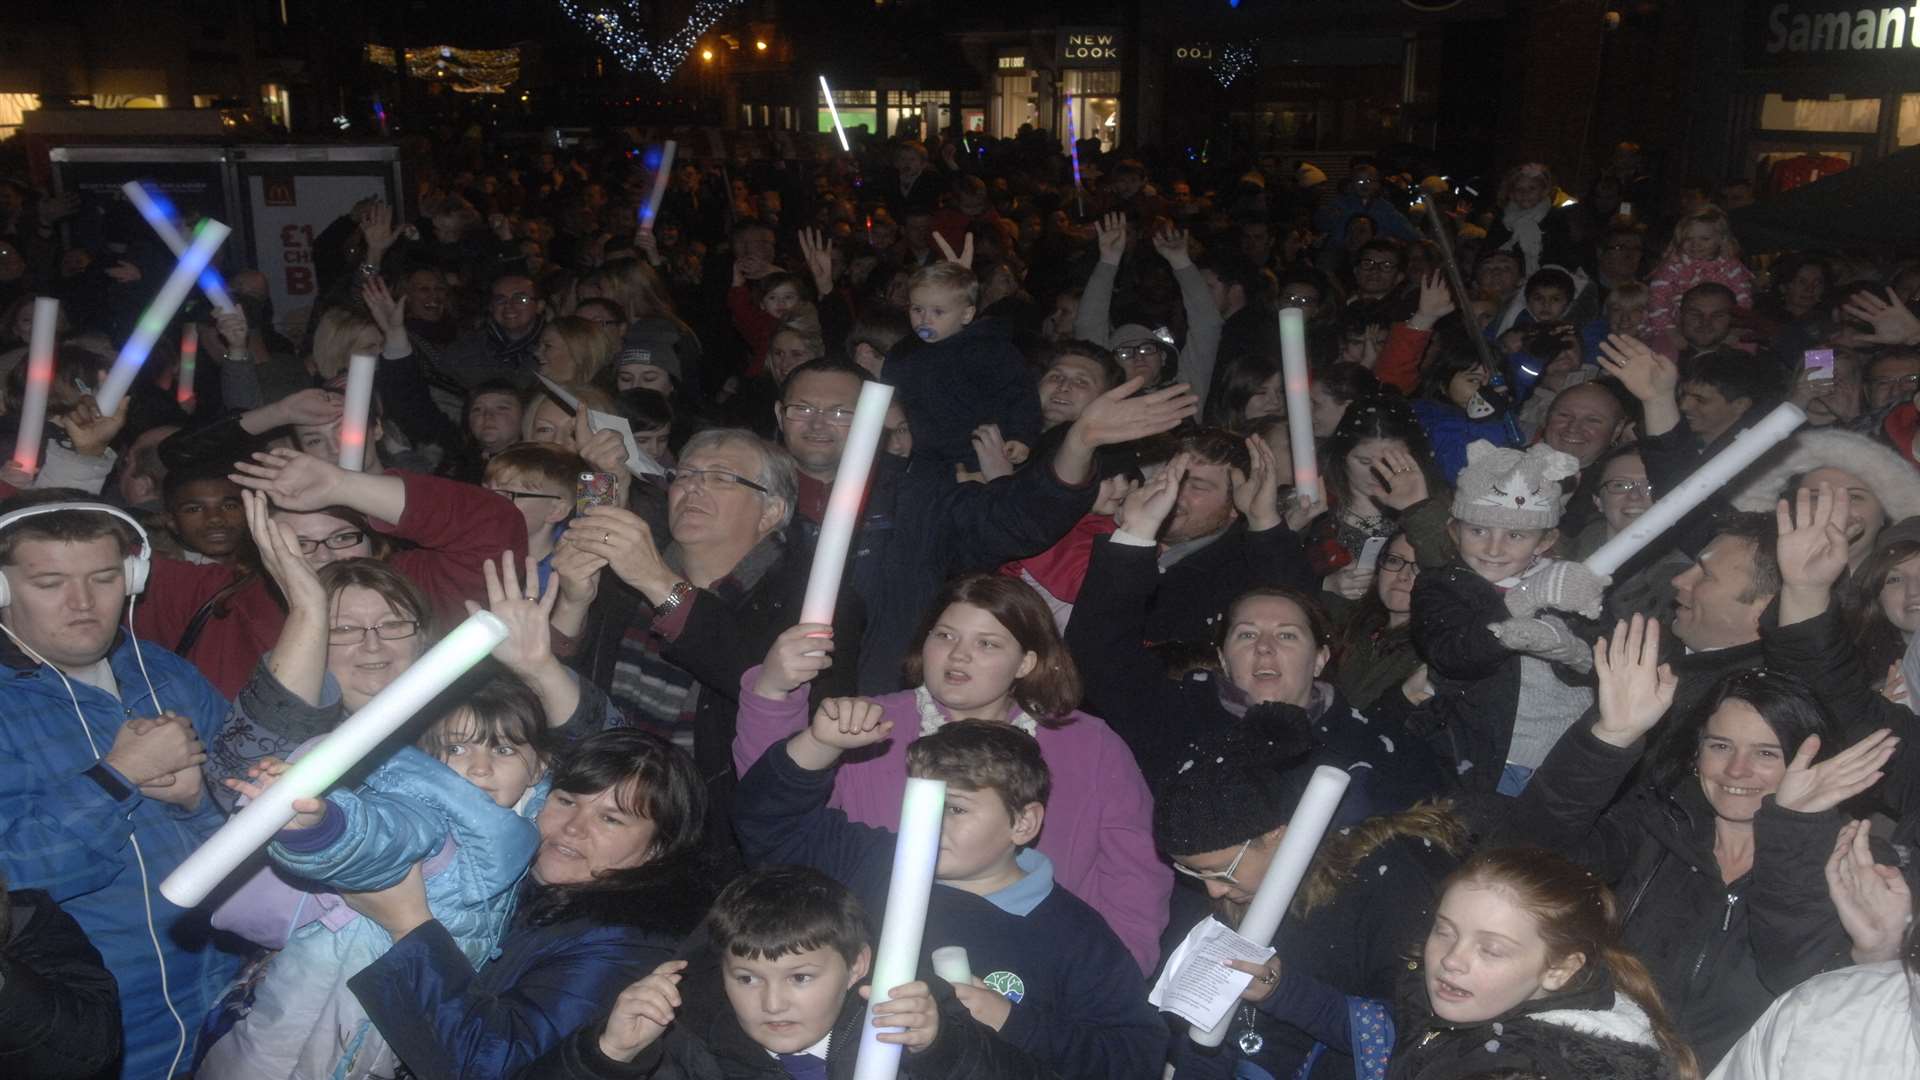 Spectators at the Canterbury Christmas lights launch